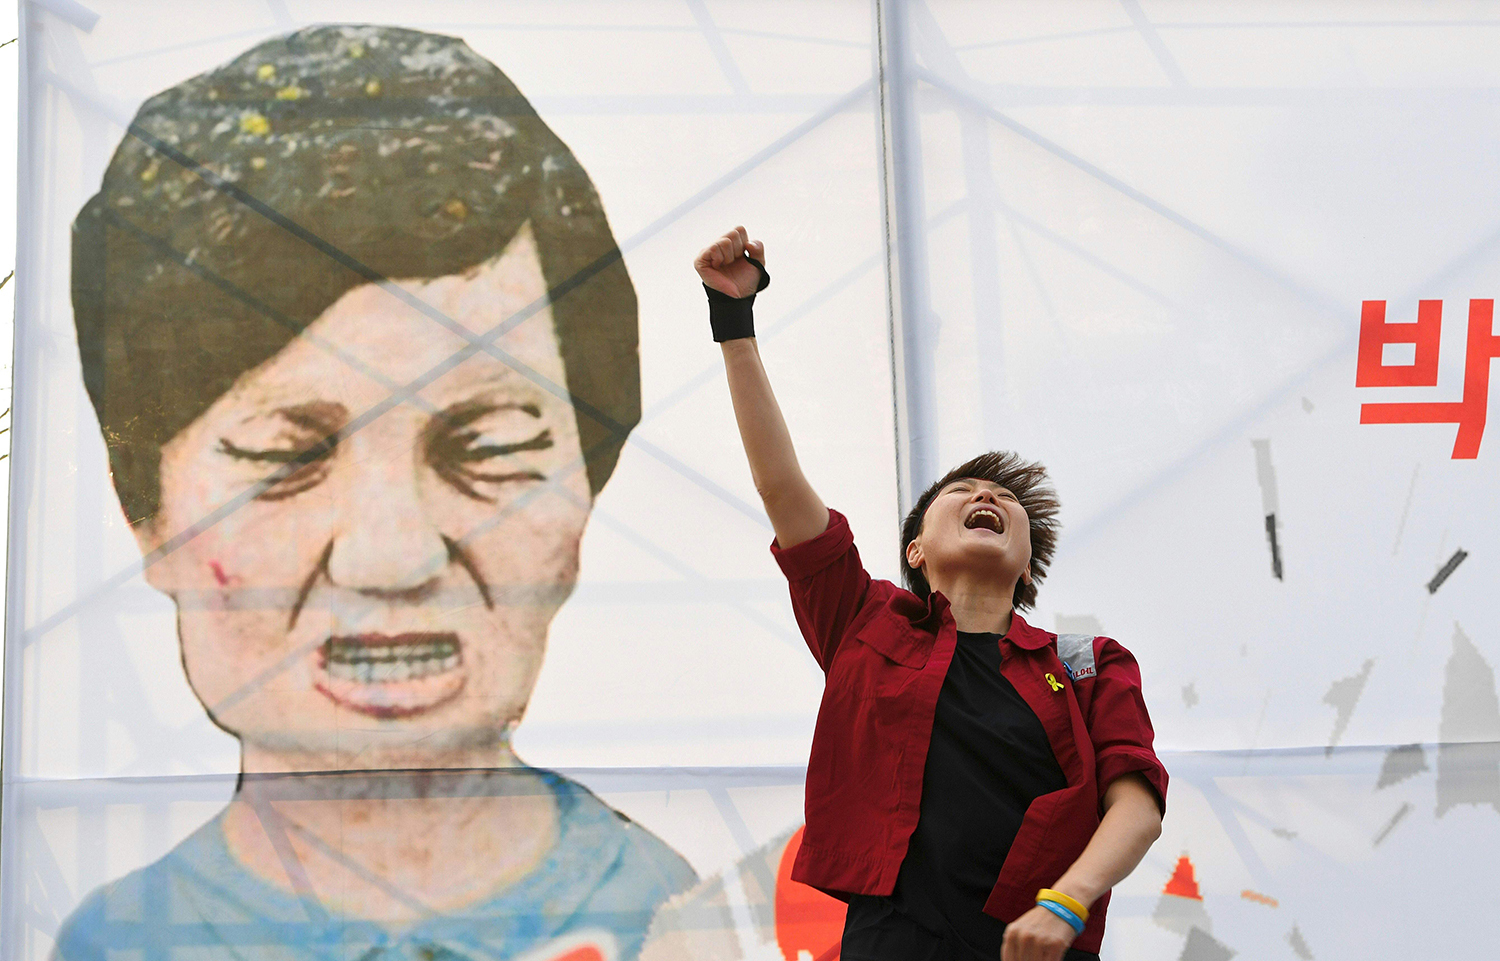 TOPSHOT - A protester shouts slogans in front of a caricature of South Korea's President Park Geun-Hye during a rally urging the impeachment of the president in Seoul on December 7, 2016. South Korea's scandal-hit Park said on December 6 she would accept the result of a looming and possibly lengthy impeachment process, but defied pressure to resign immediately. / AFP PHOTO / JUNG Yeon-Je / TT / kod 444